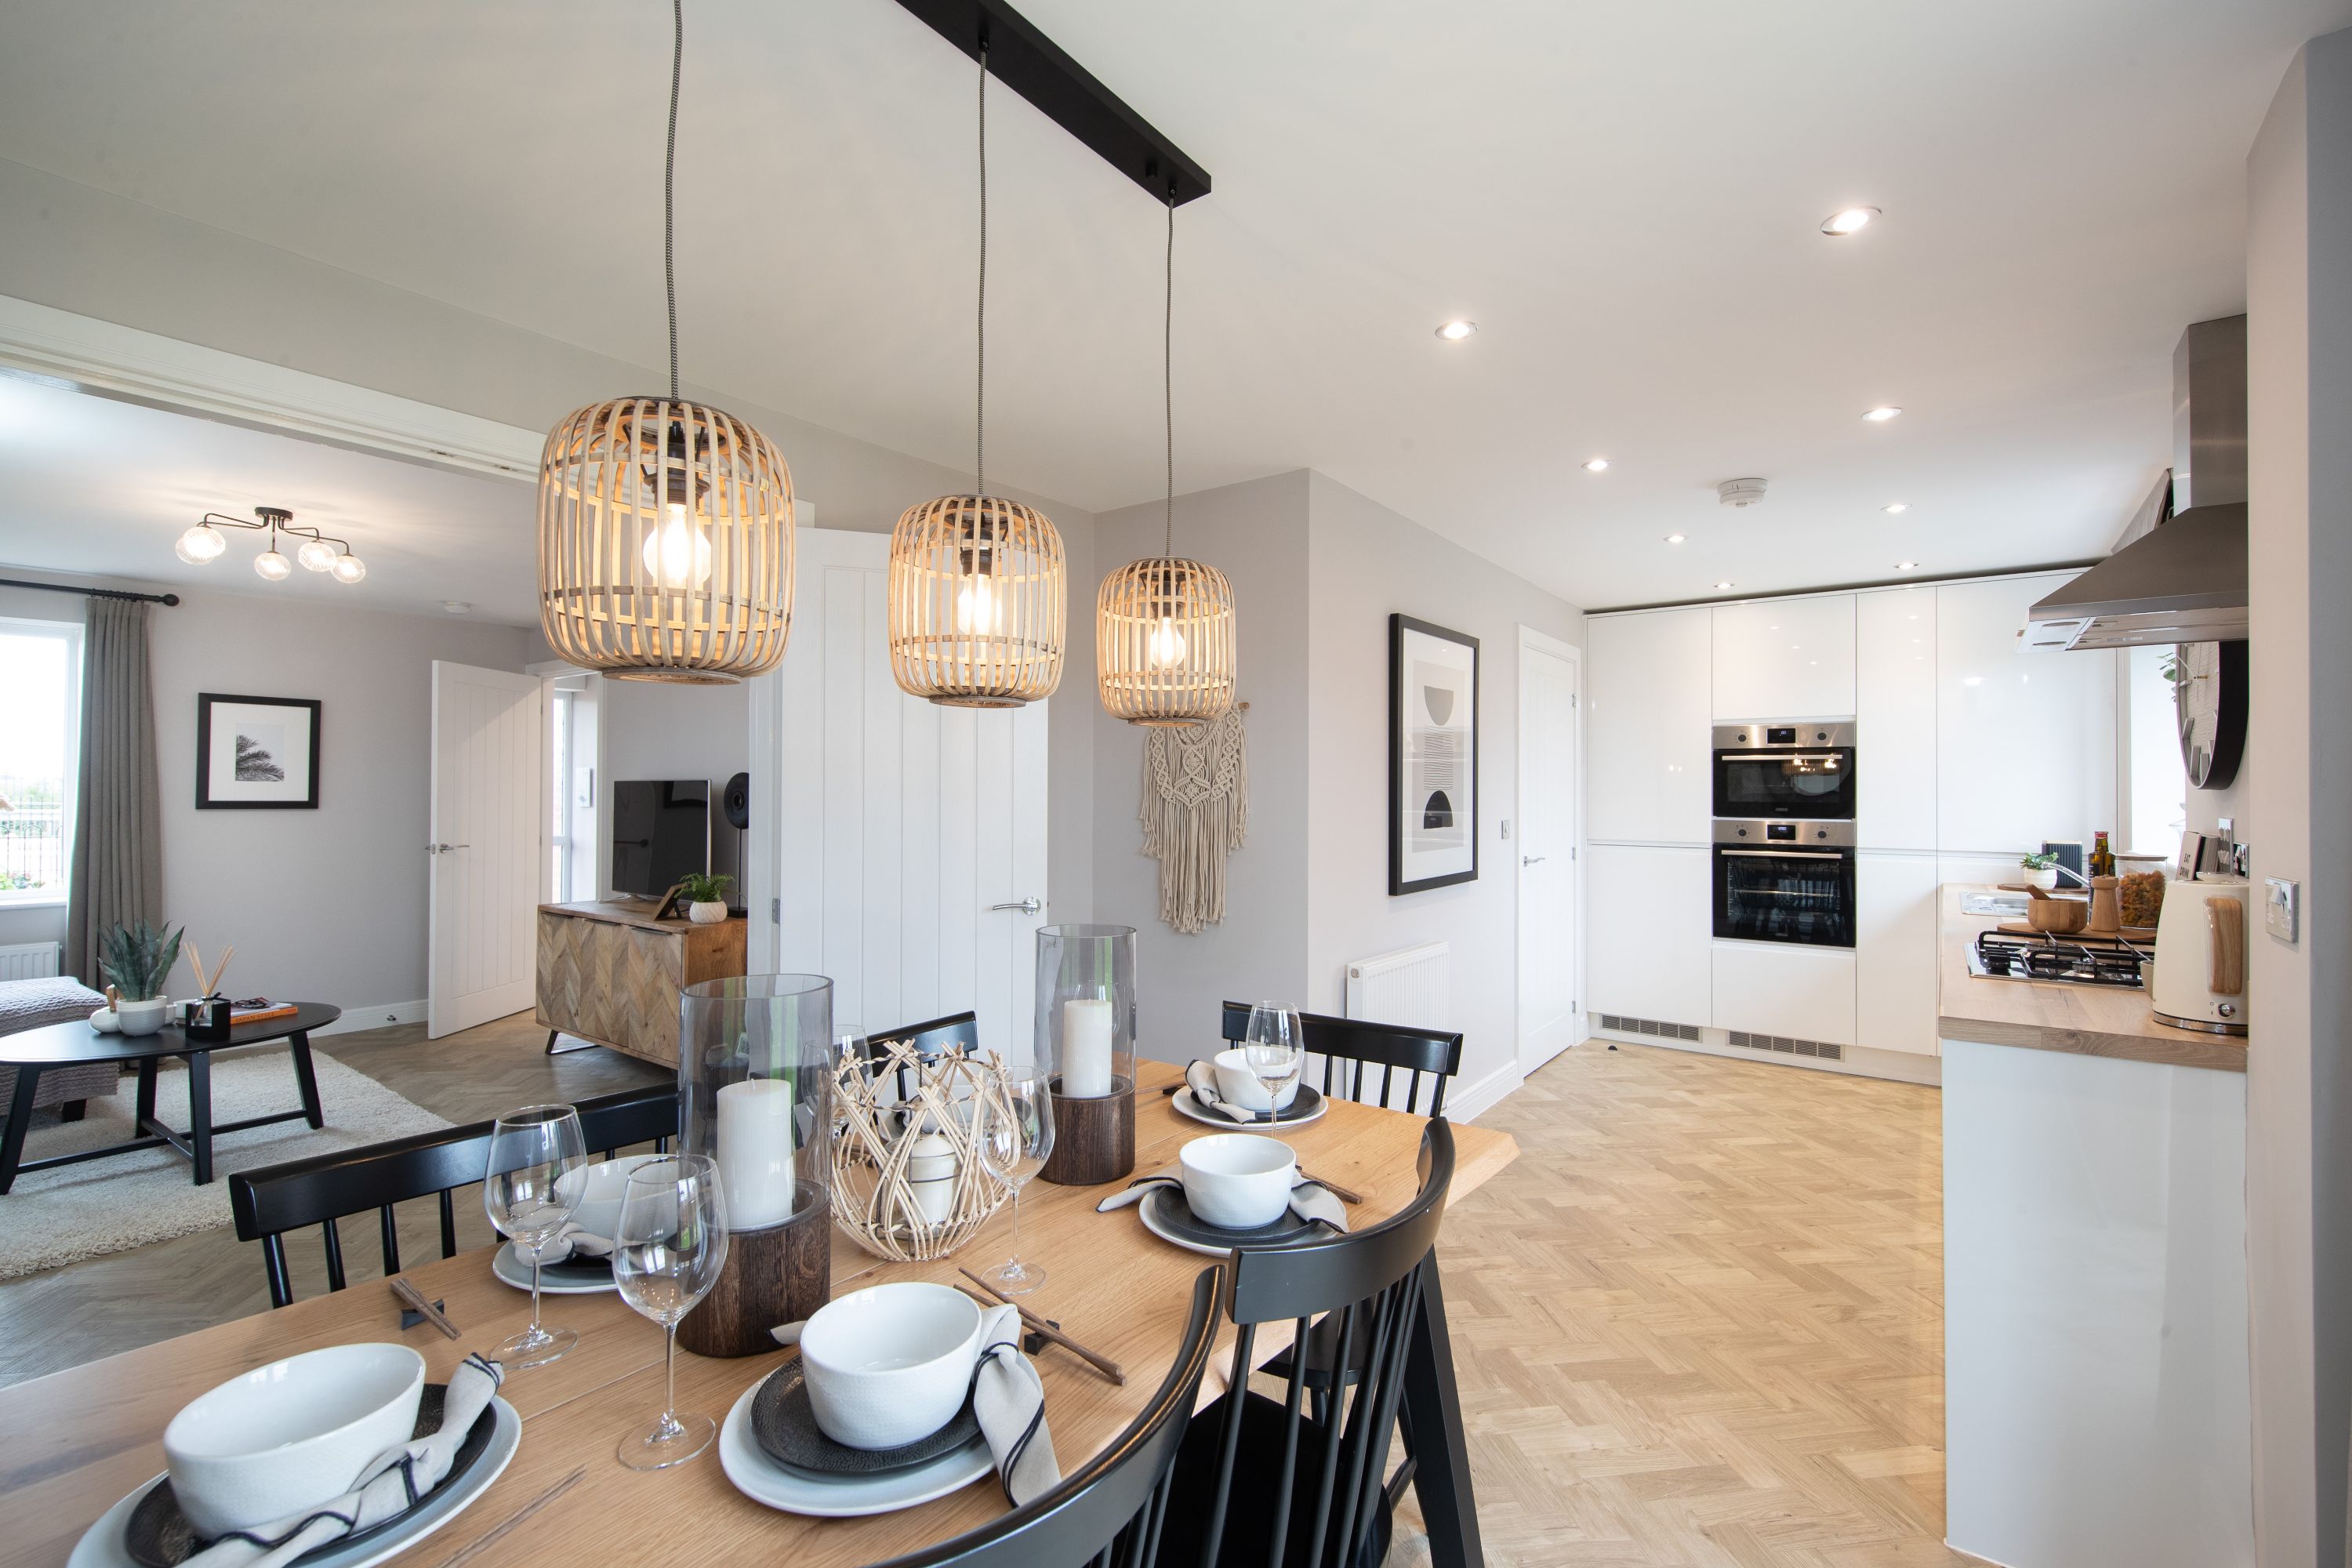 Property 3 of 20. Showhome Photography